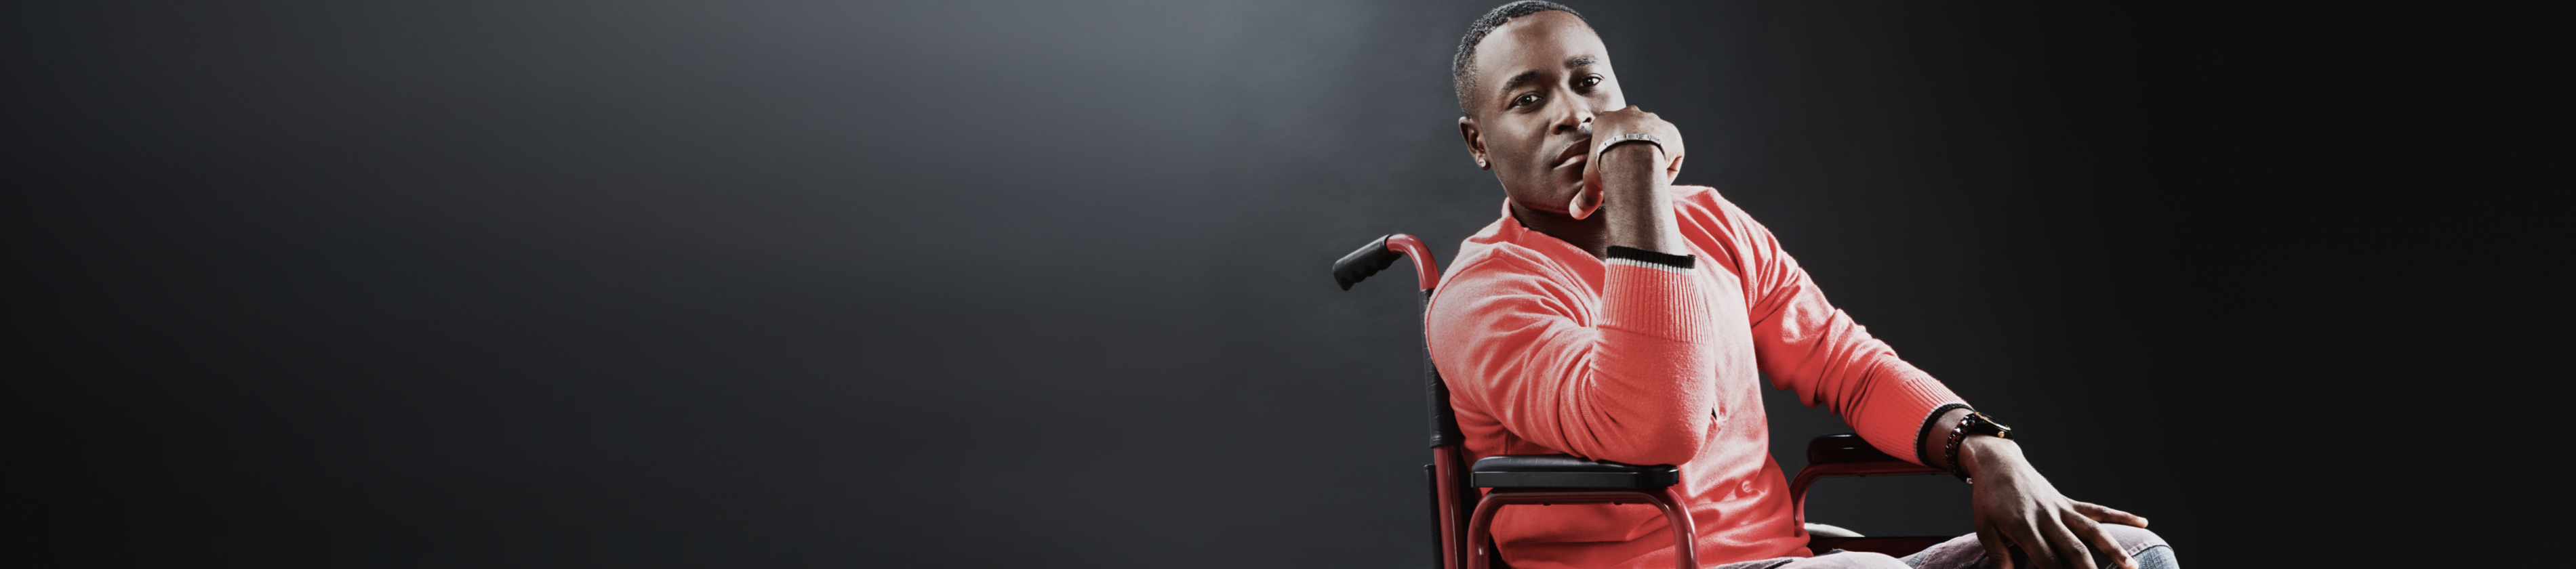 Confident man in wheelchair with hand on chin.